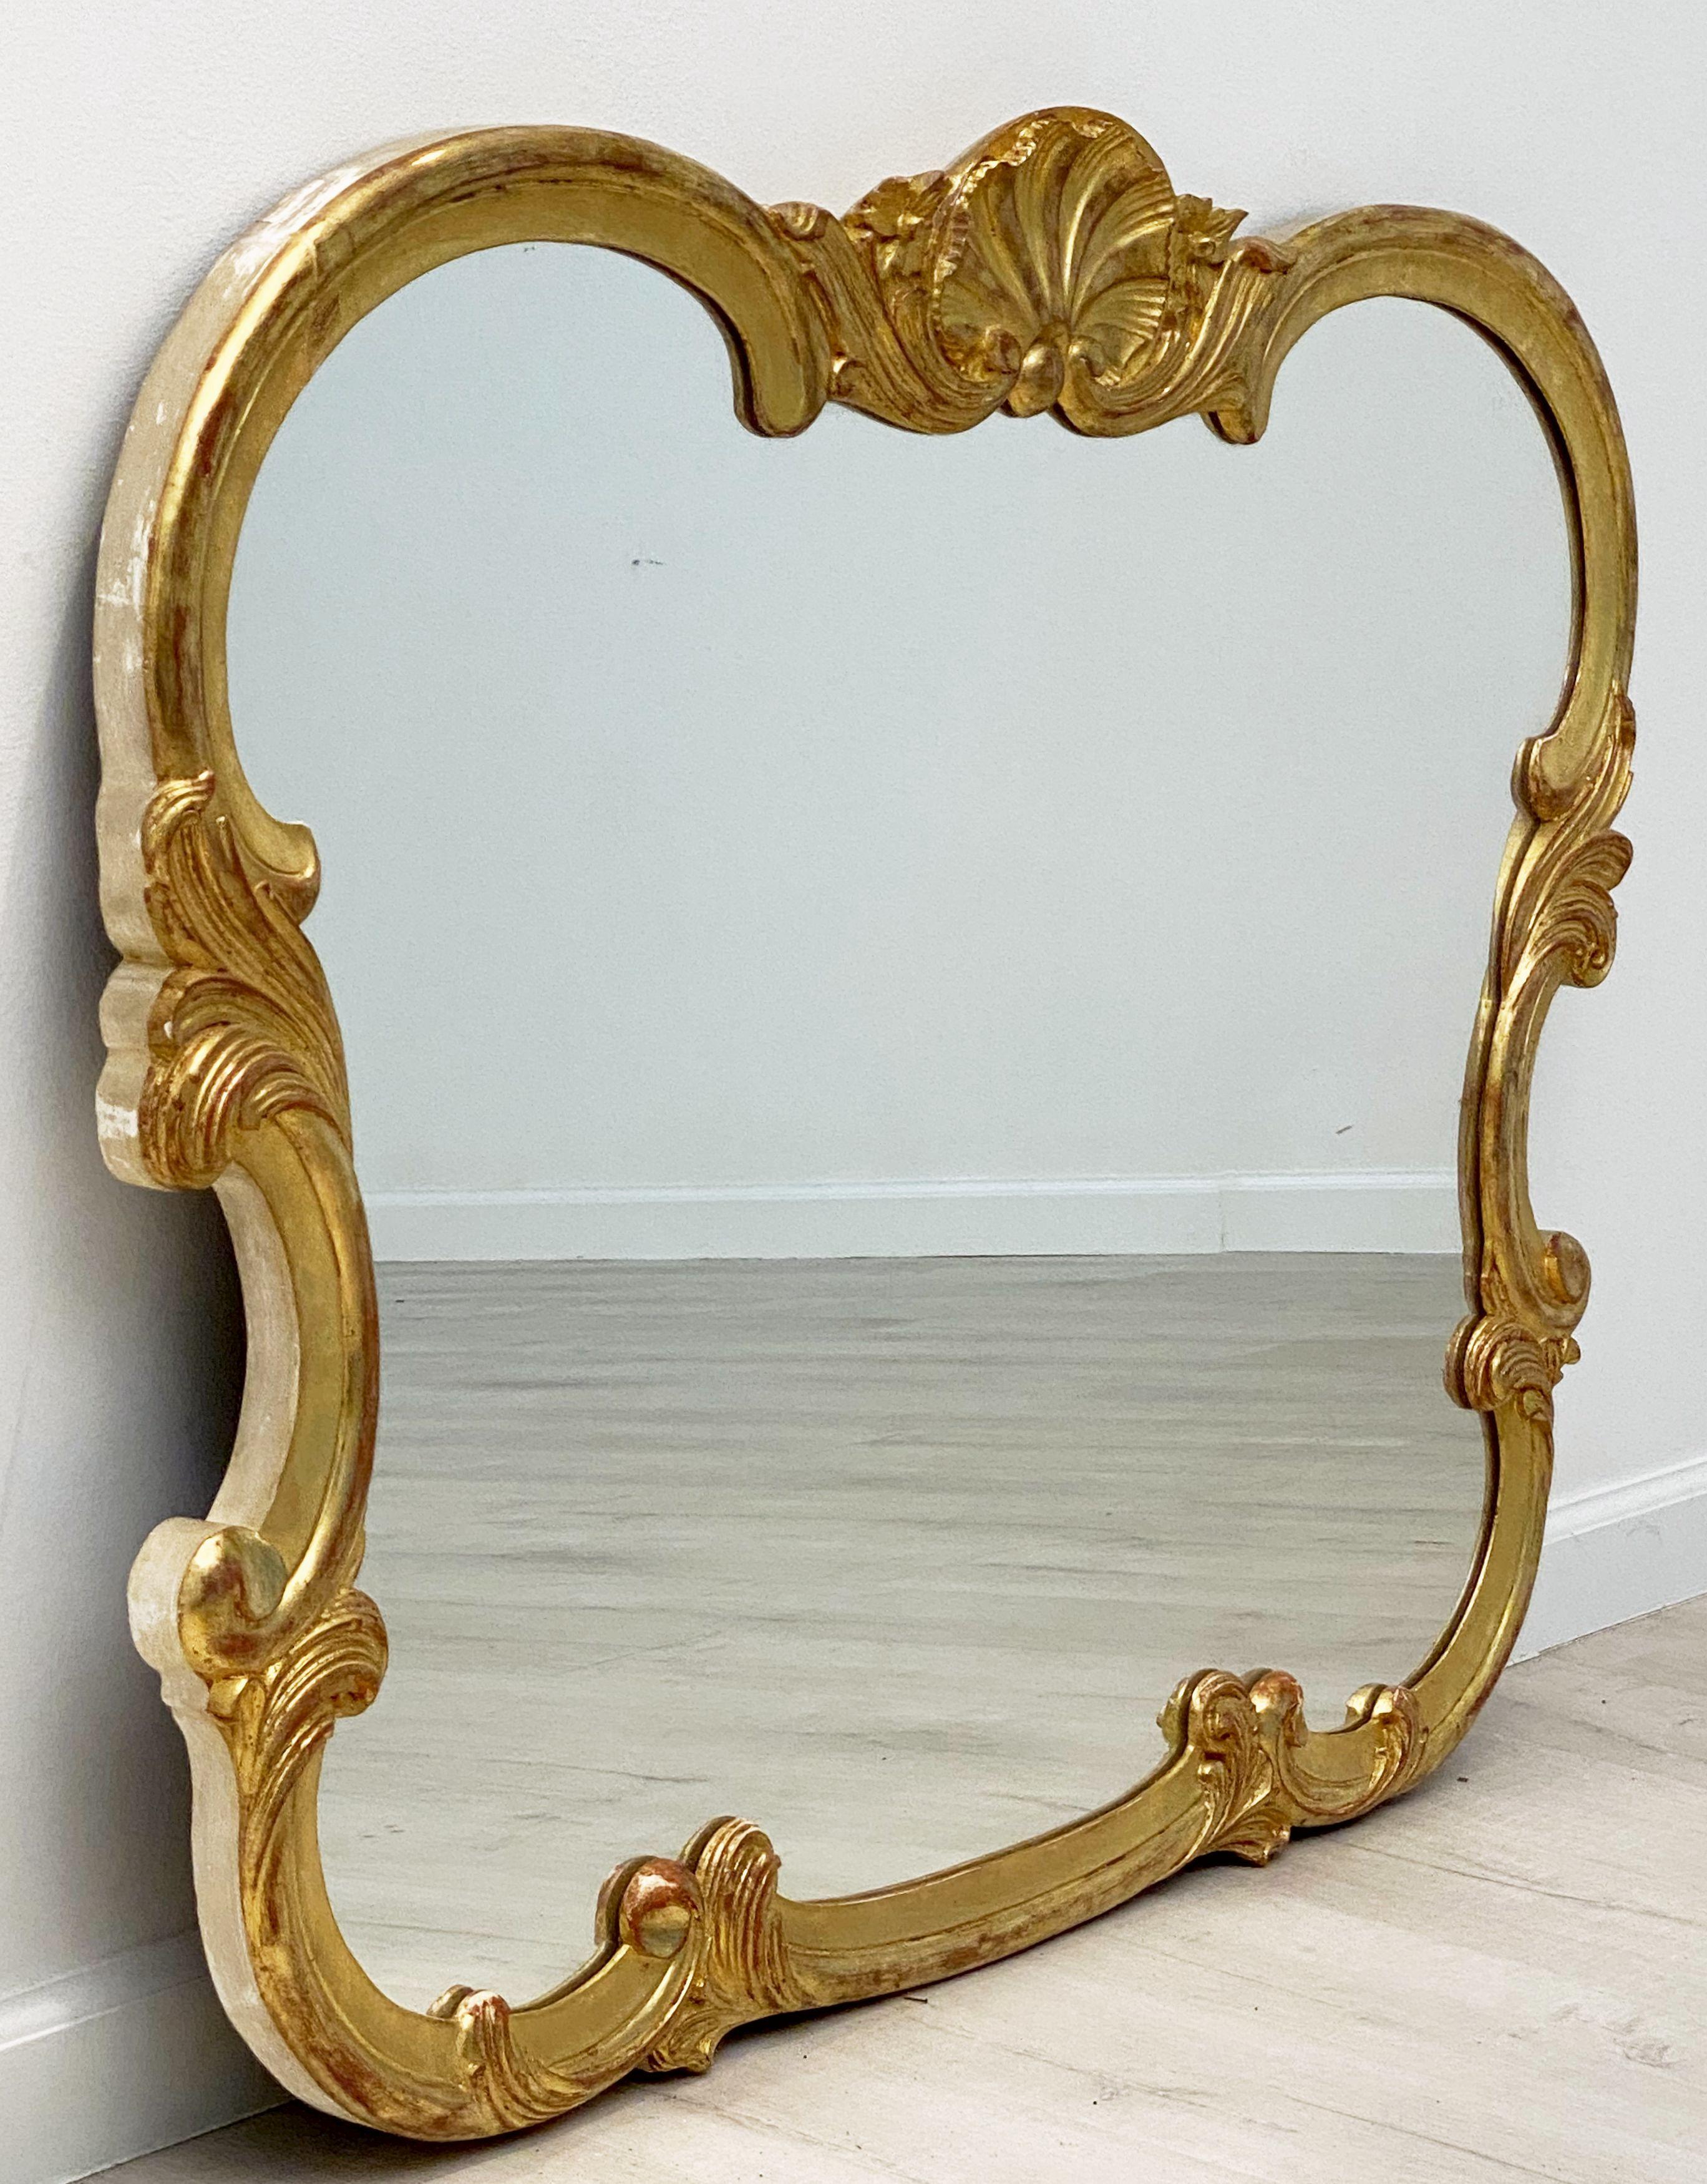 A fine large French wall mirror featuring a gilded wood frame carved with seashell crest and lovely scrollwork detail. 

Dimensions are H 33 3/4 inches x W 47 inches